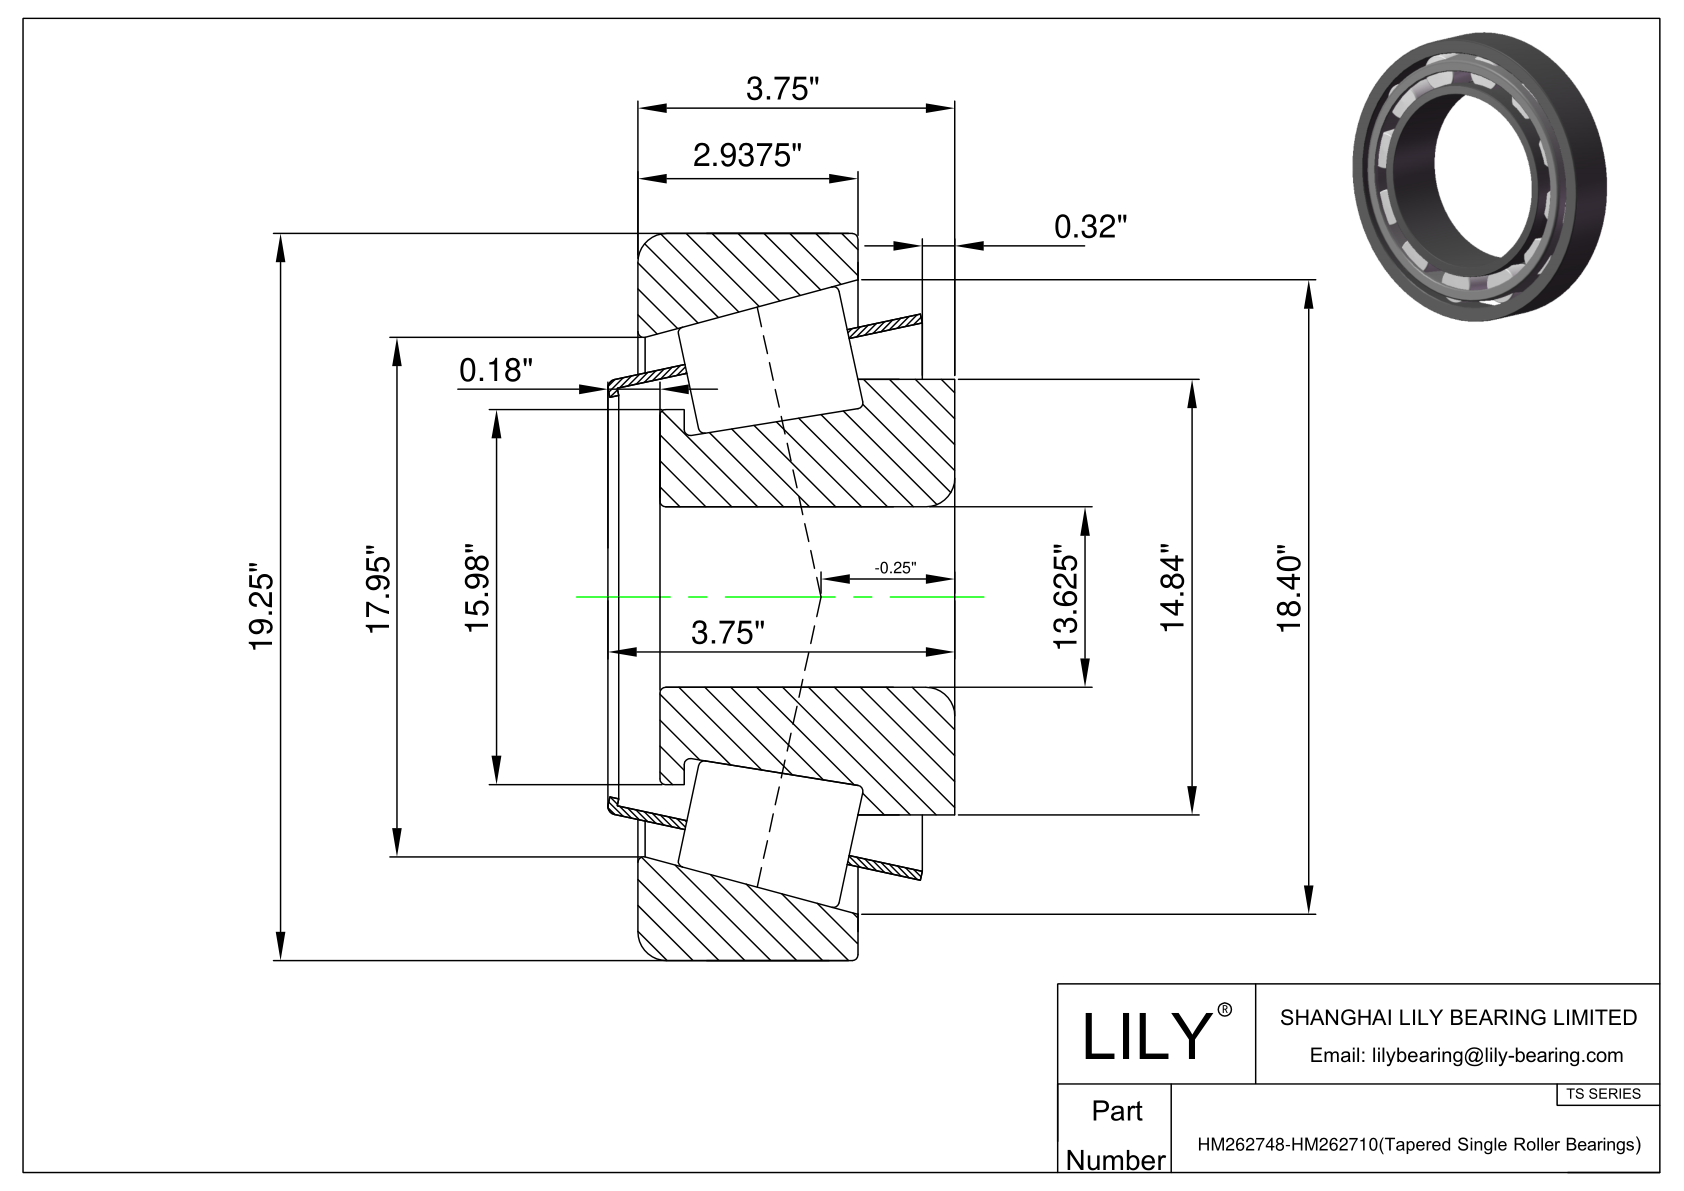 HM262748-HM262710 TS (Tapered Single Roller Bearings) (Imperial) cad drawing